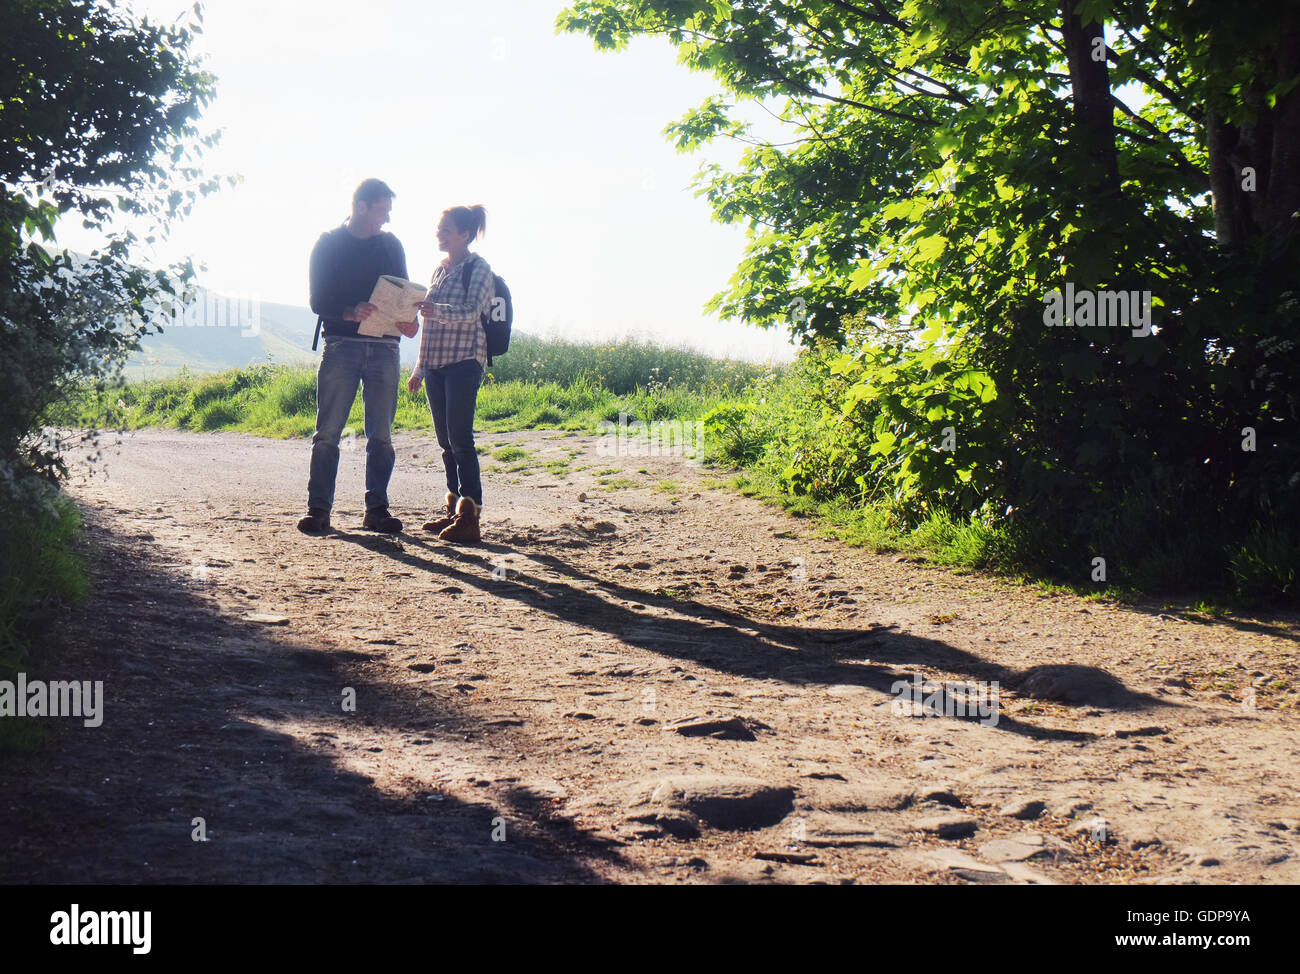 Couple hiking on dirt track reading map Stock Photo